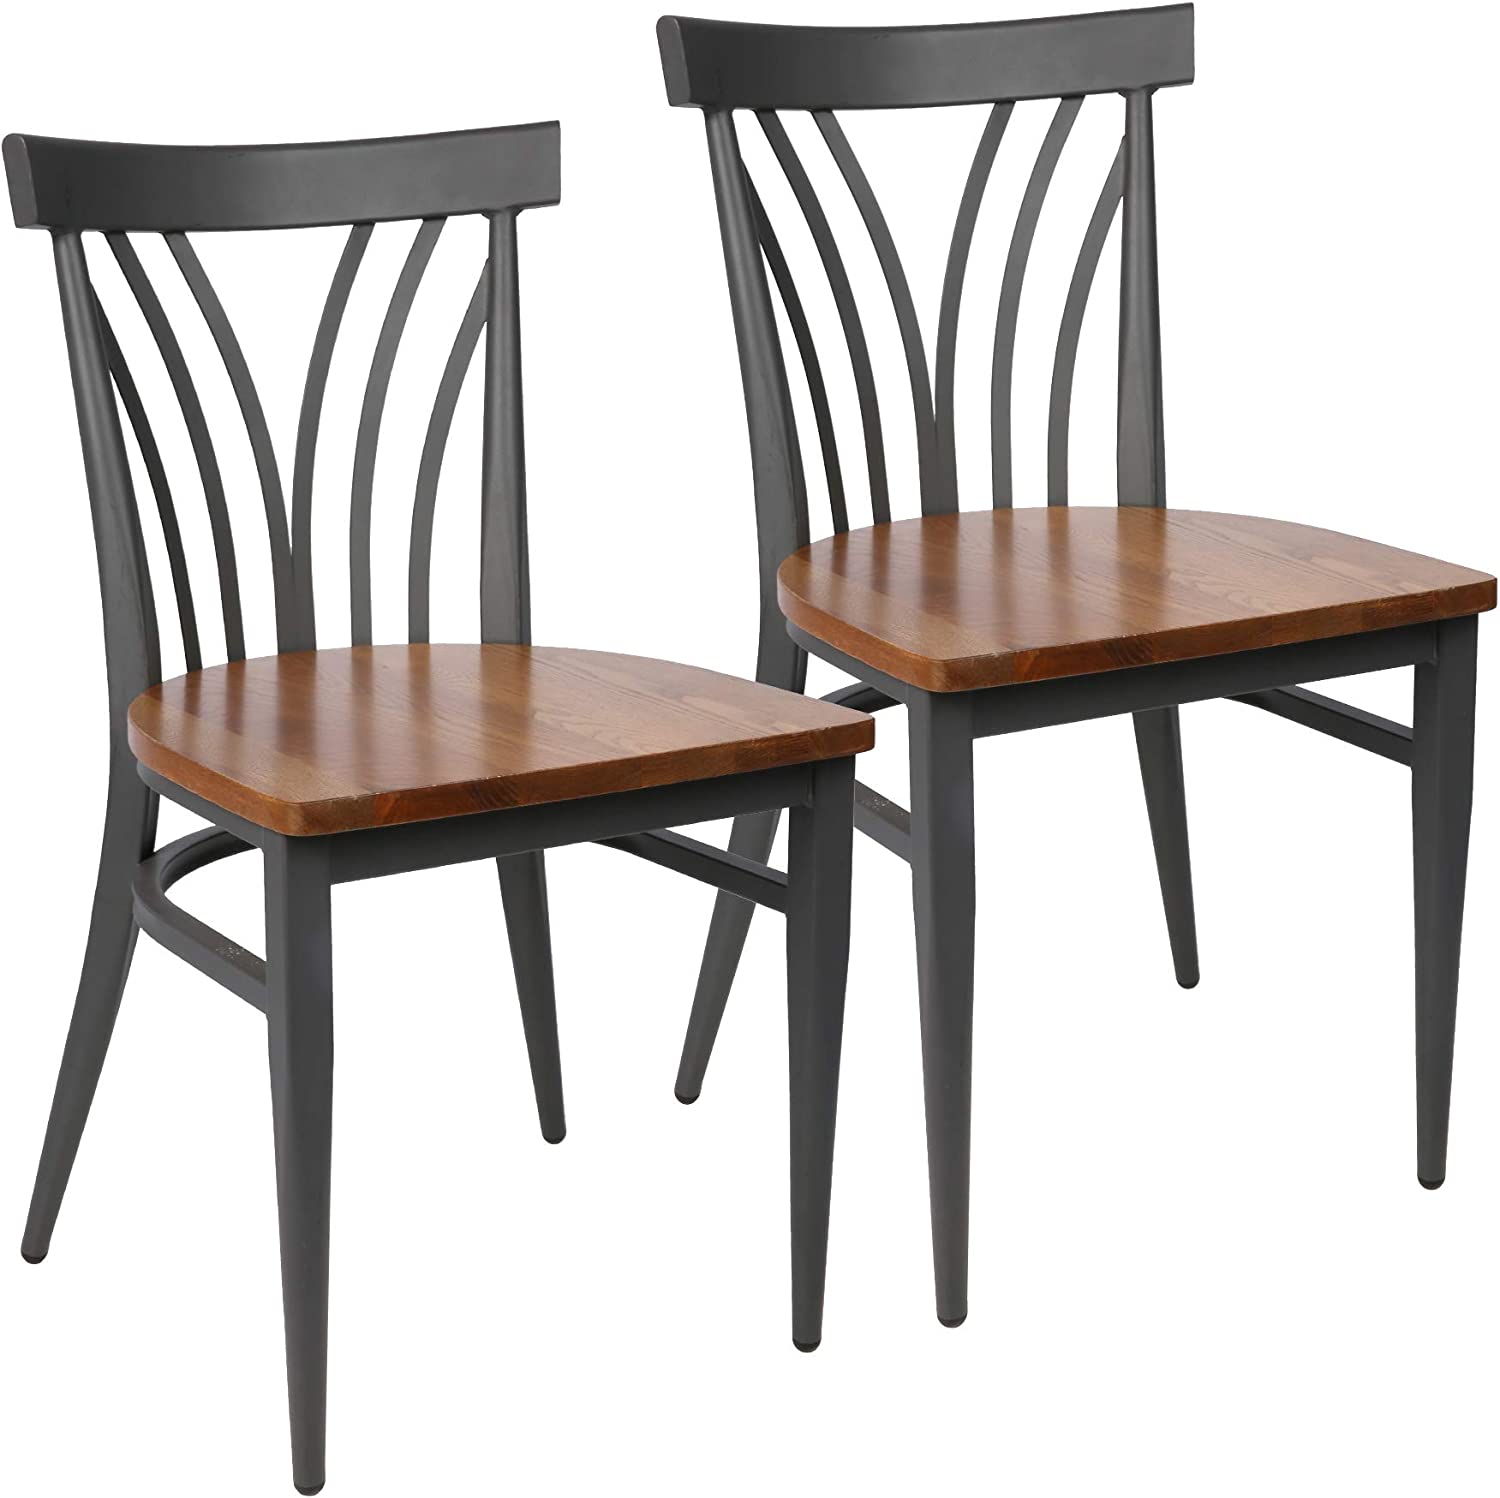 Modern Industrial Kitchen Dining Chairs Set of 2